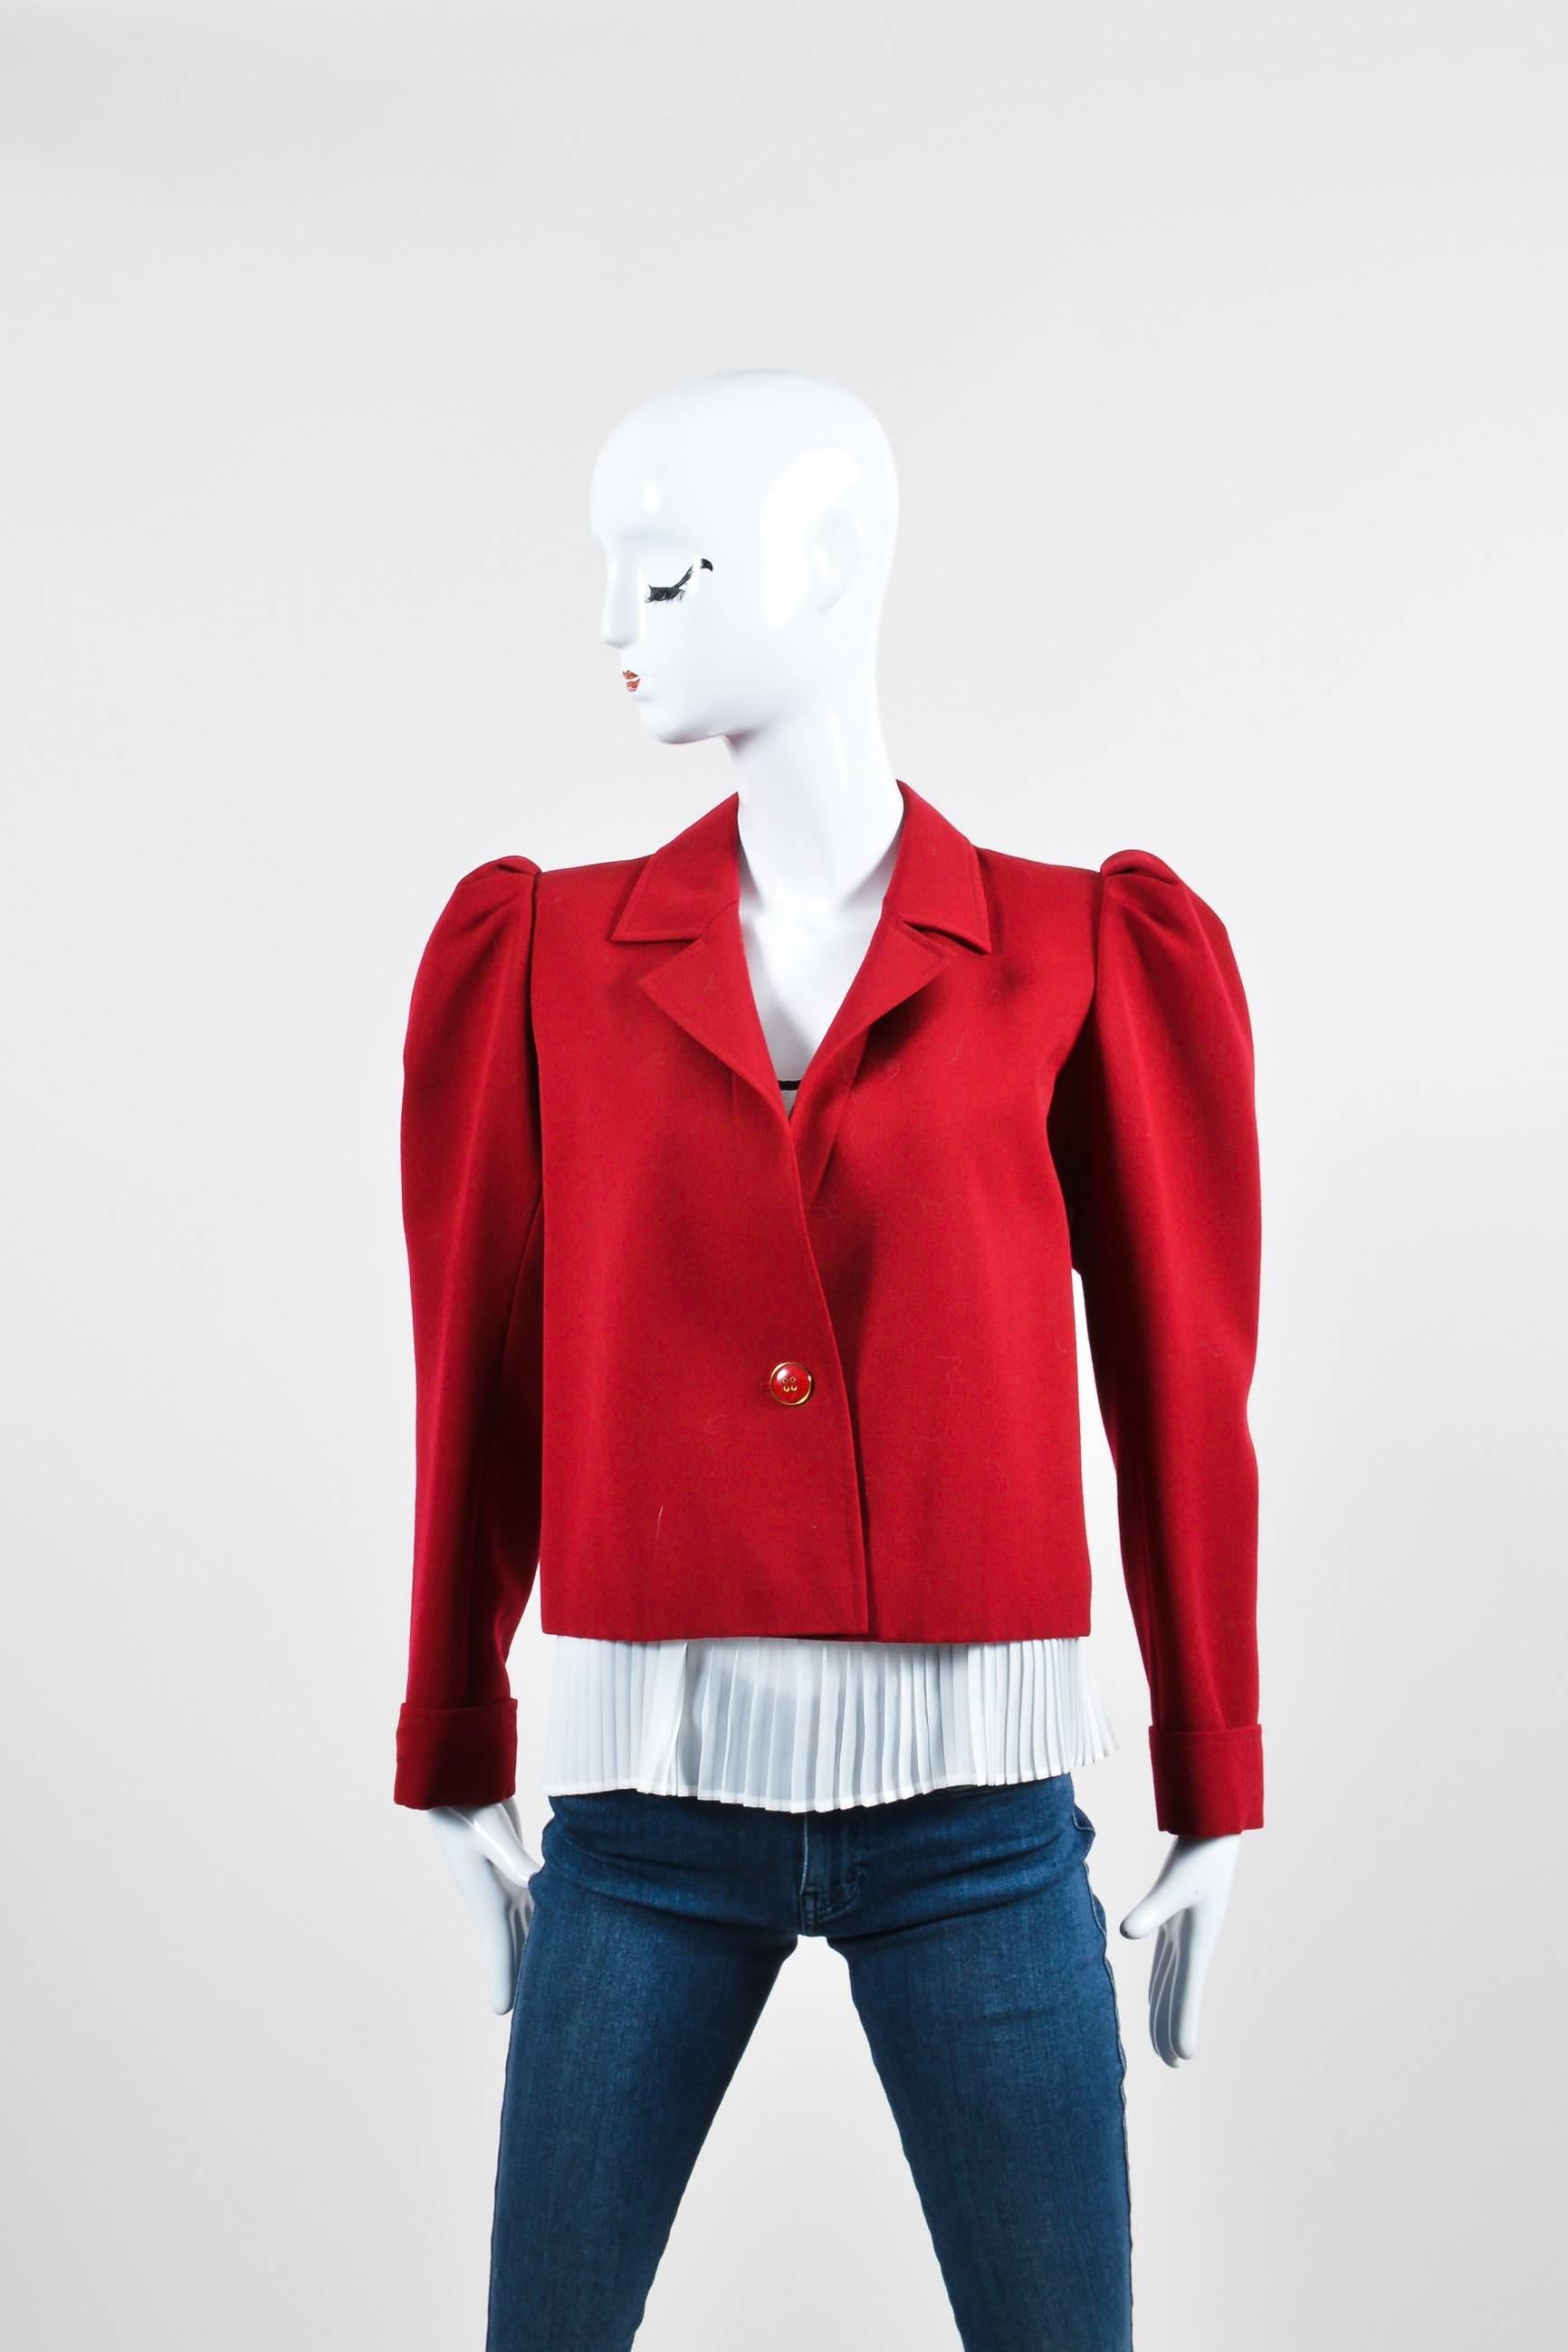 Vintage Saint Laurent Rive Gauche jacket in red wool. Features a notch lapel and leg-of-mutton cuffed sleeves. Red and gold-tone buttons underneath cuffs and a single buttn closure at waist. Hits at lower waist. Fully lined. Pair this stunning piece